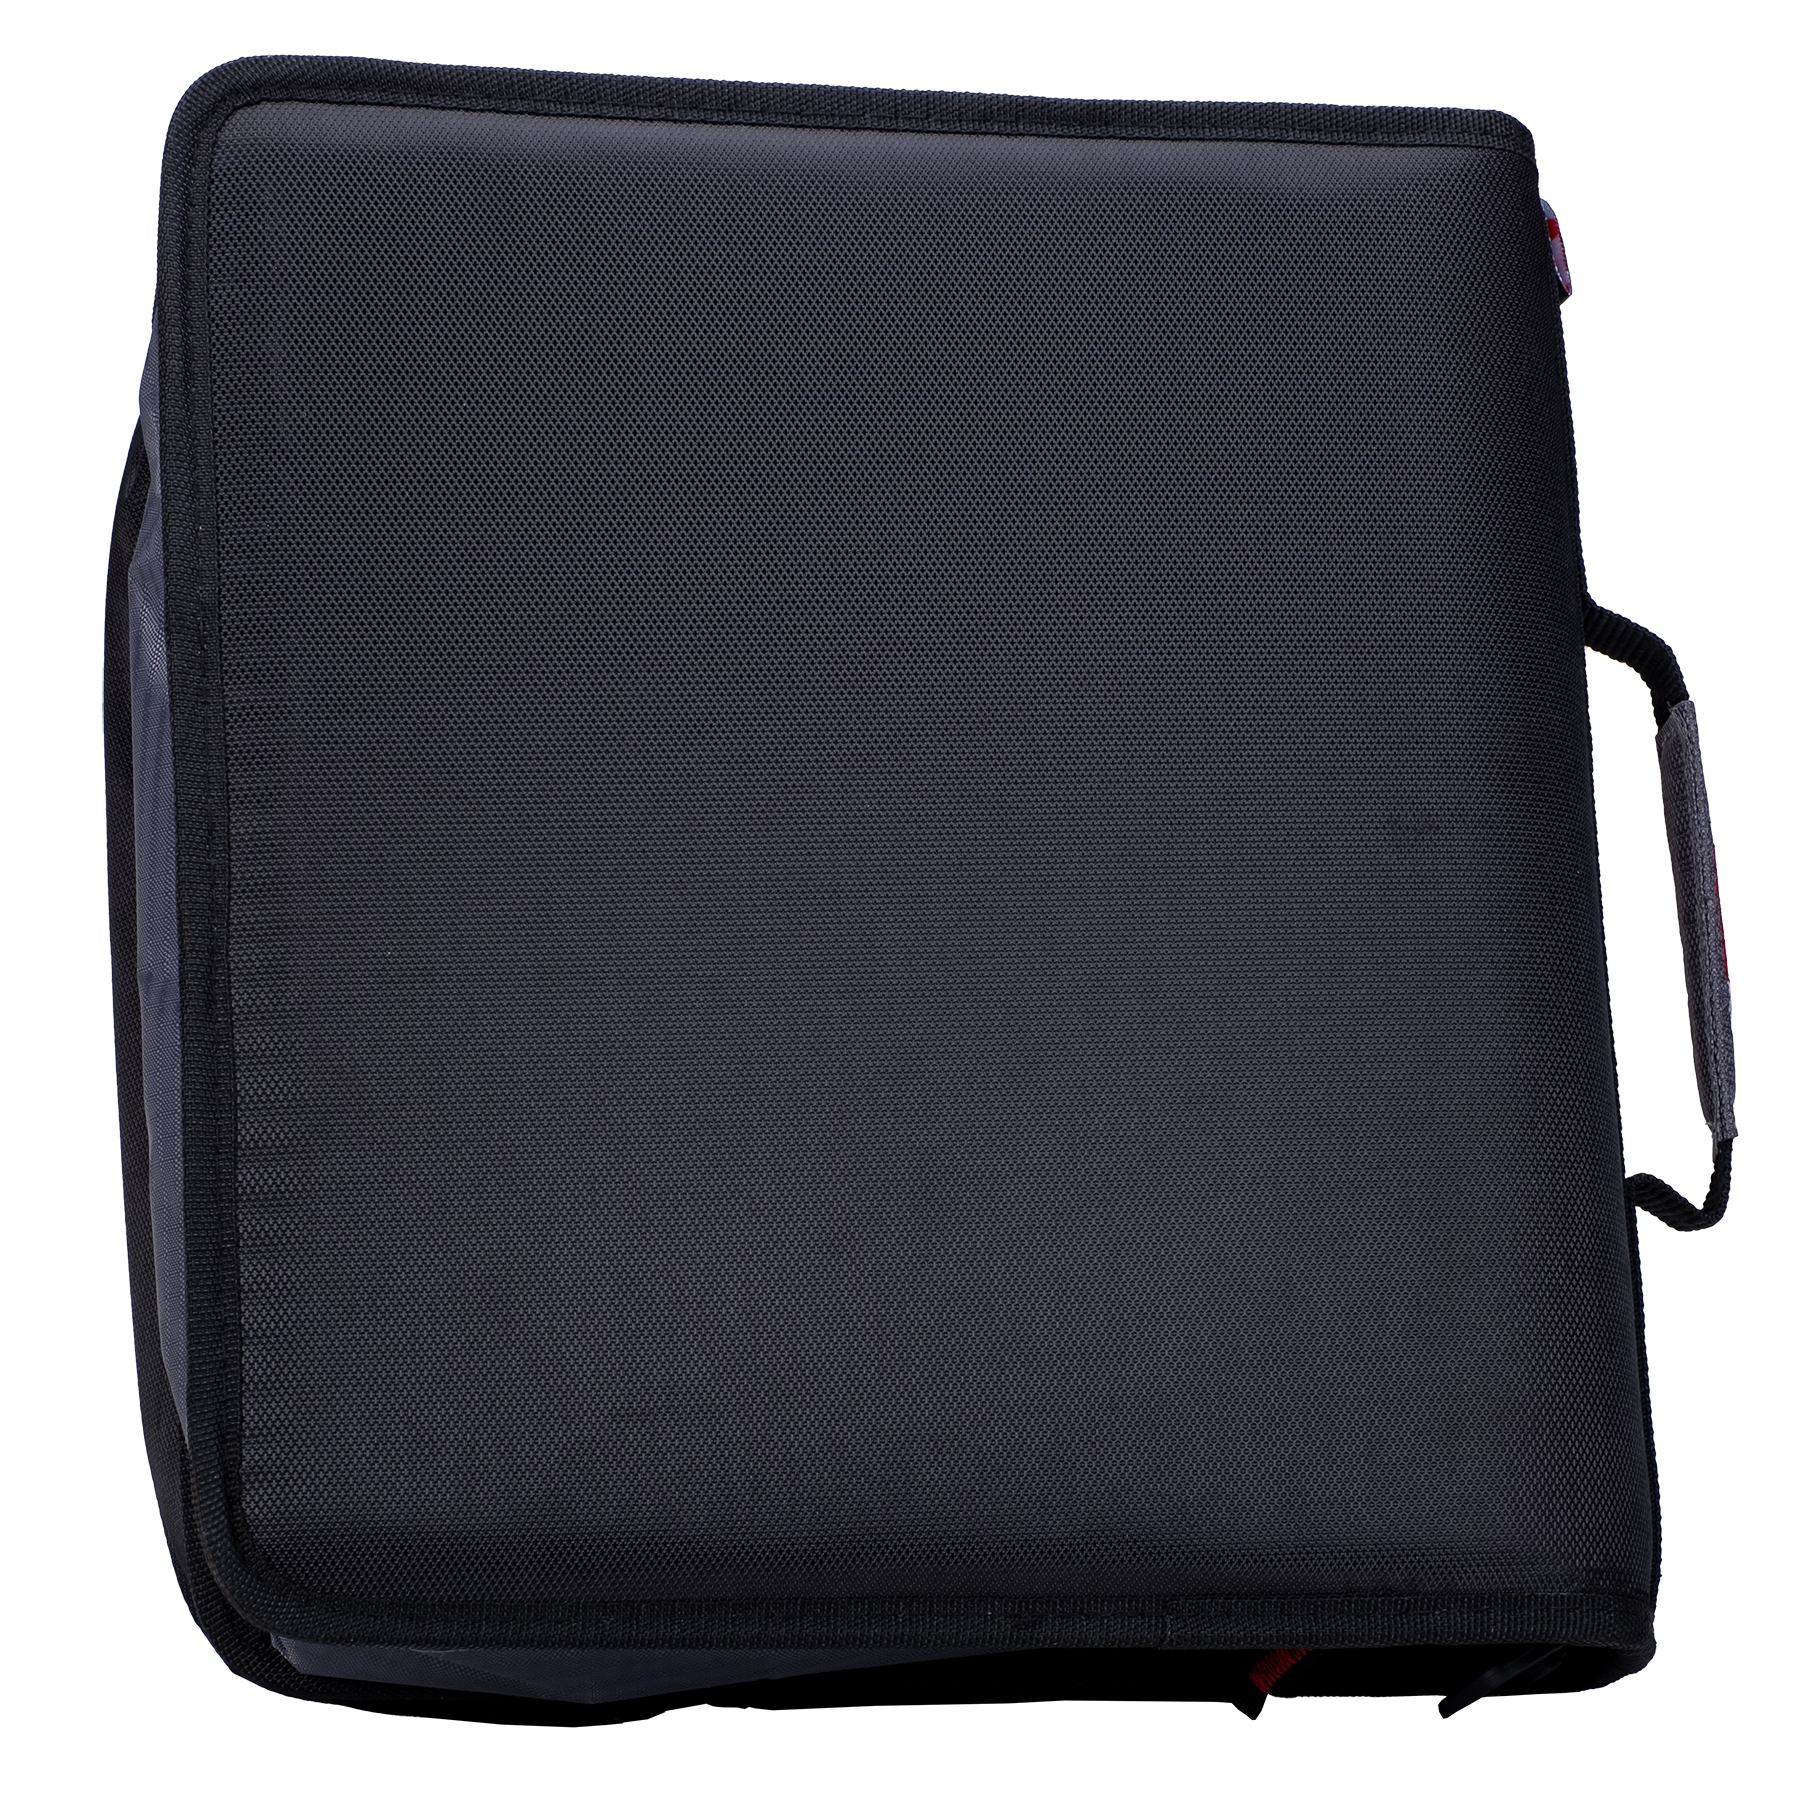 The Universal - Case•it - Protect your Tech w/ this laptop zipper binder!